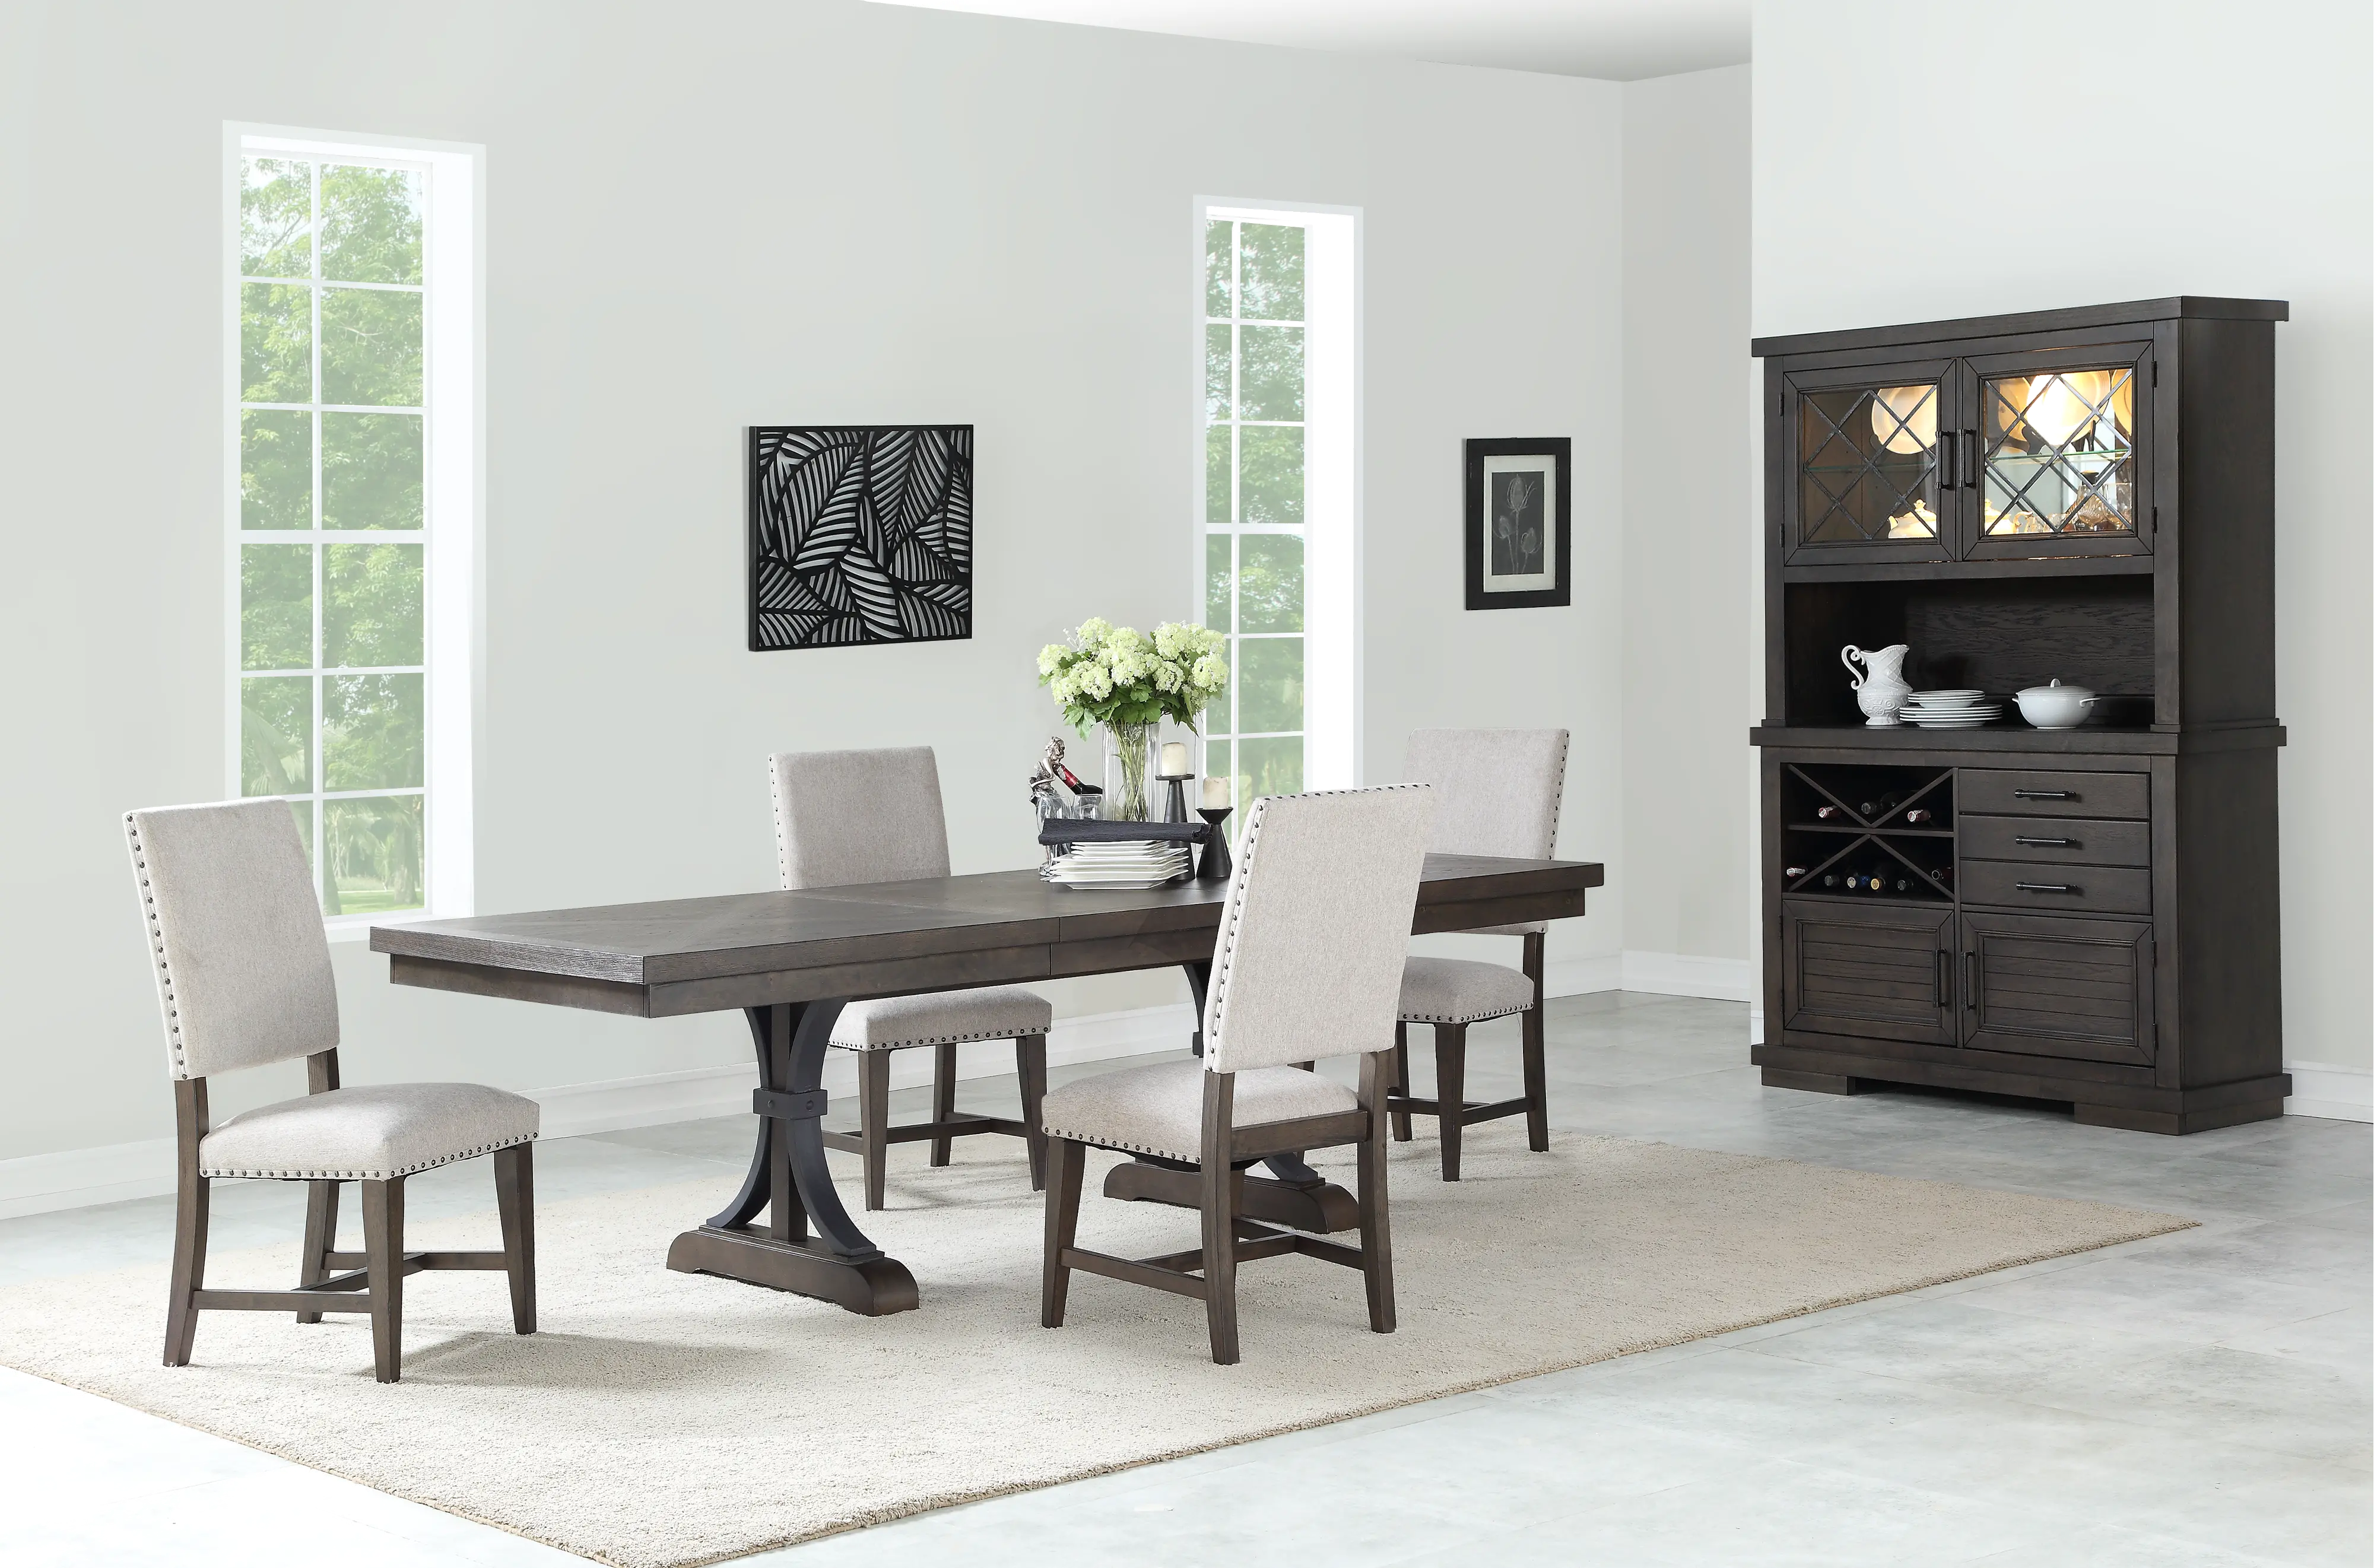 Revolution Gray and Brown 5 Piece Dining Set